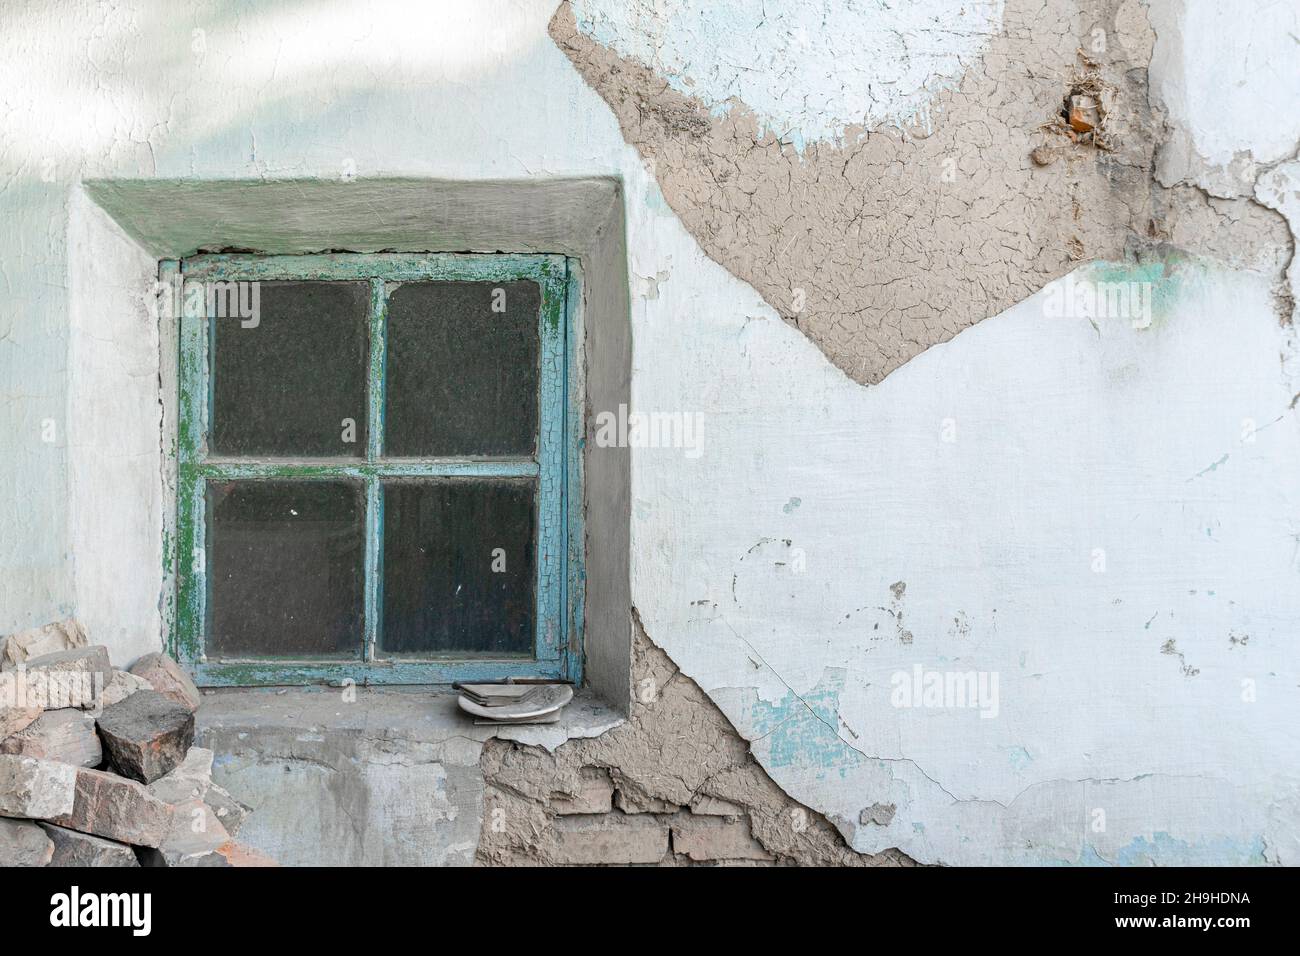 Small framed dusty window in a wall with disintegrated plastering showing layers of сement and brick. Dirty unwashed rectangular window. Stock Photo